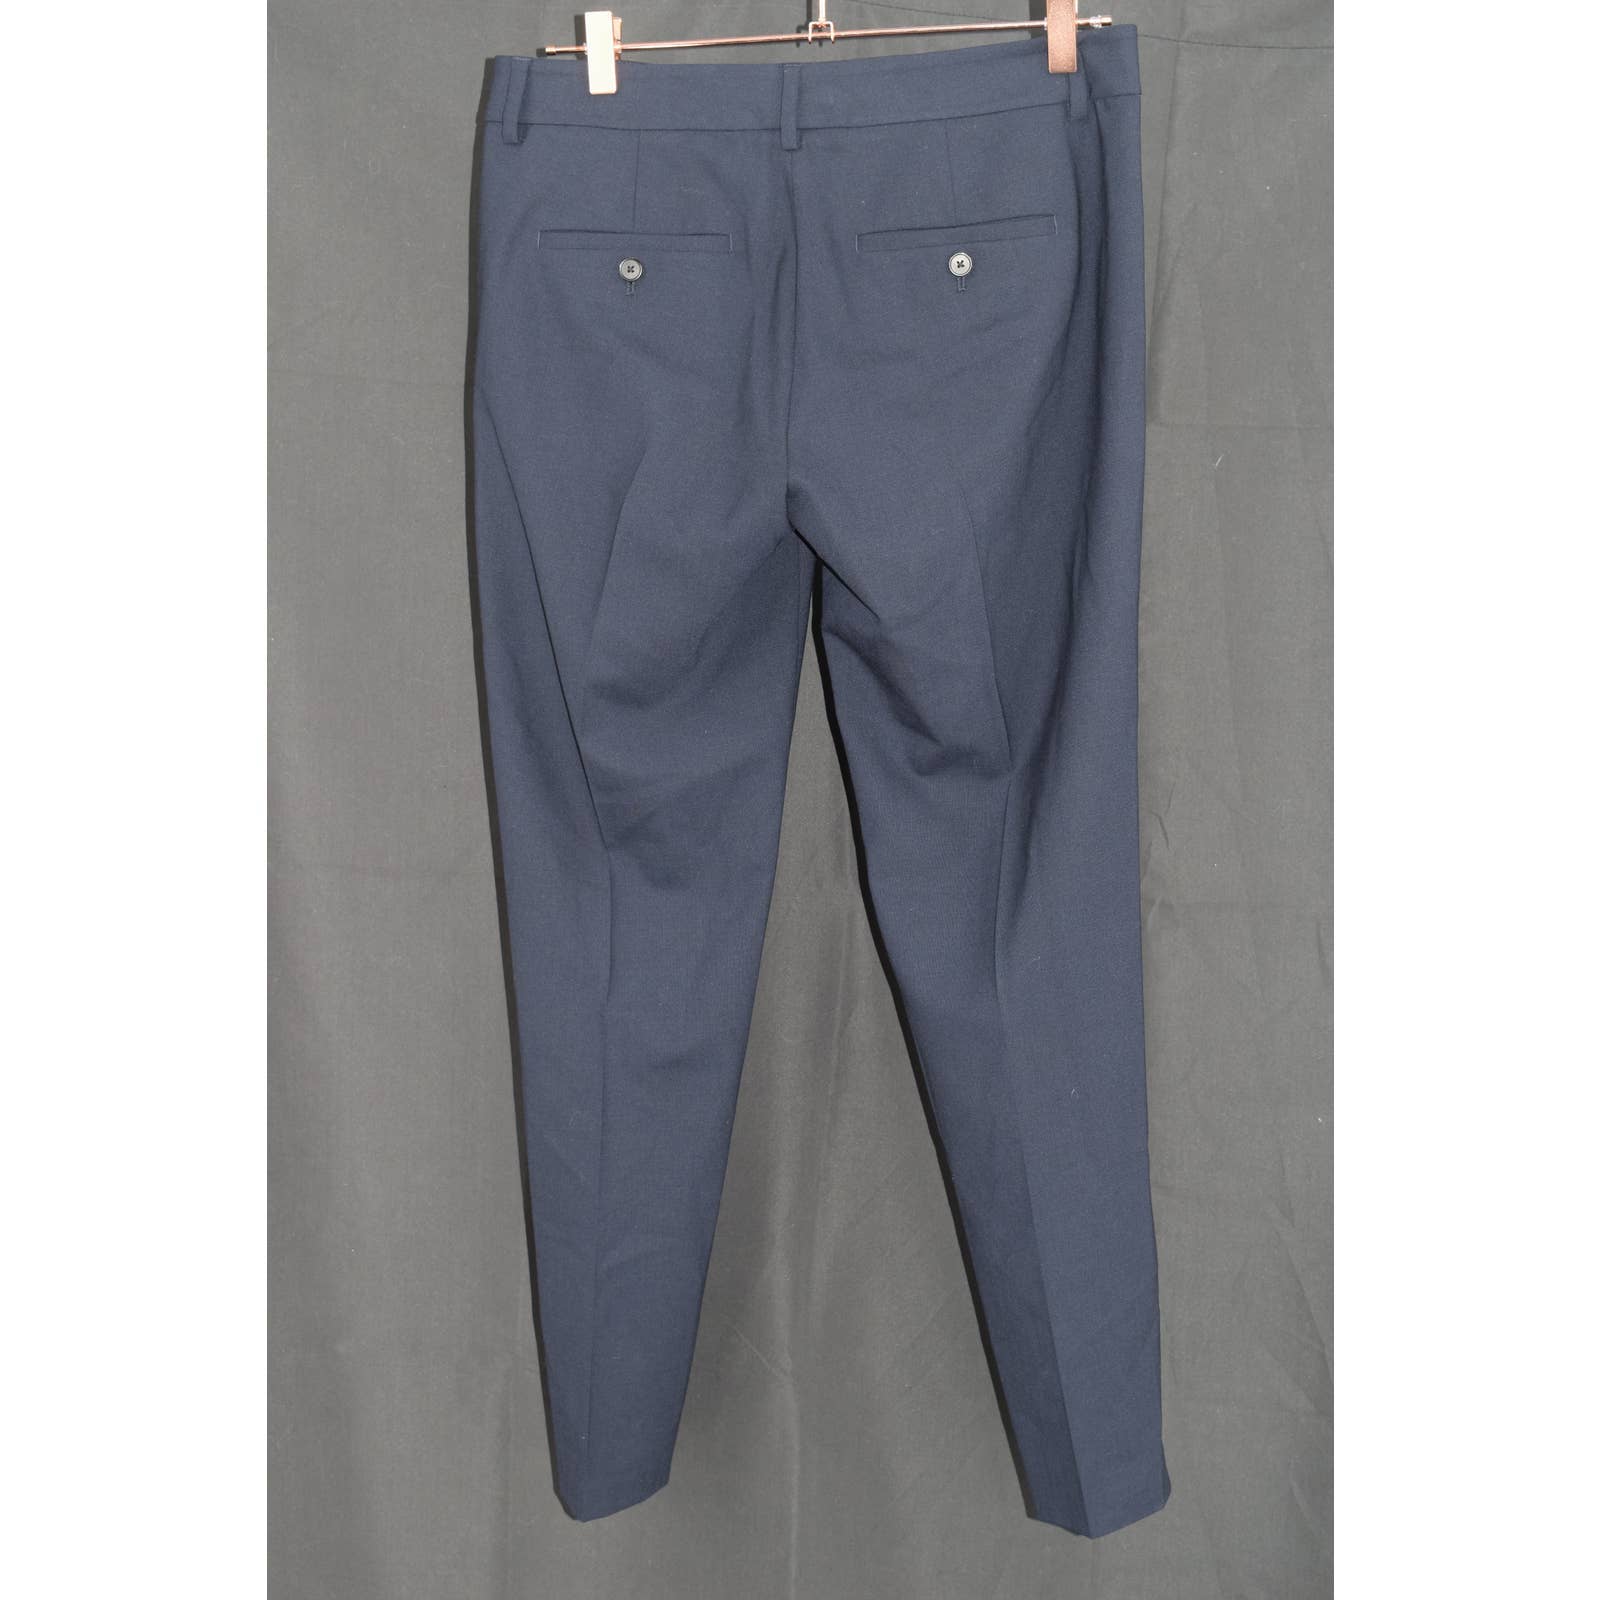 Vince Navy with Grey Strip Wool Pants - 6